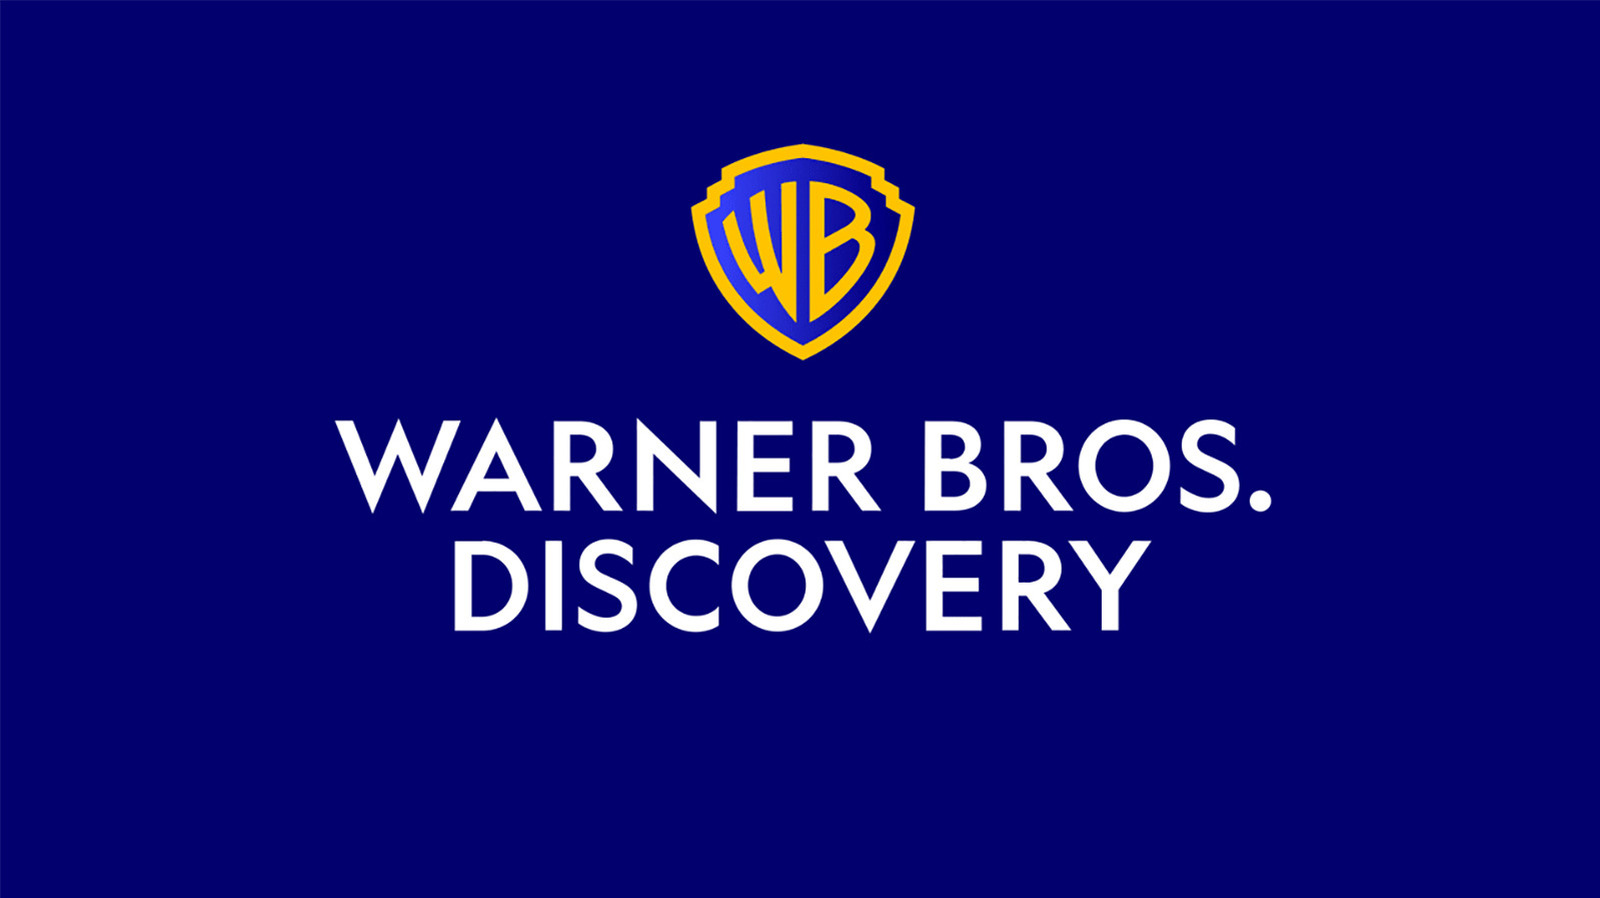 Warner Bros. Discovery will launch into free television supported by advertising (or FAST)